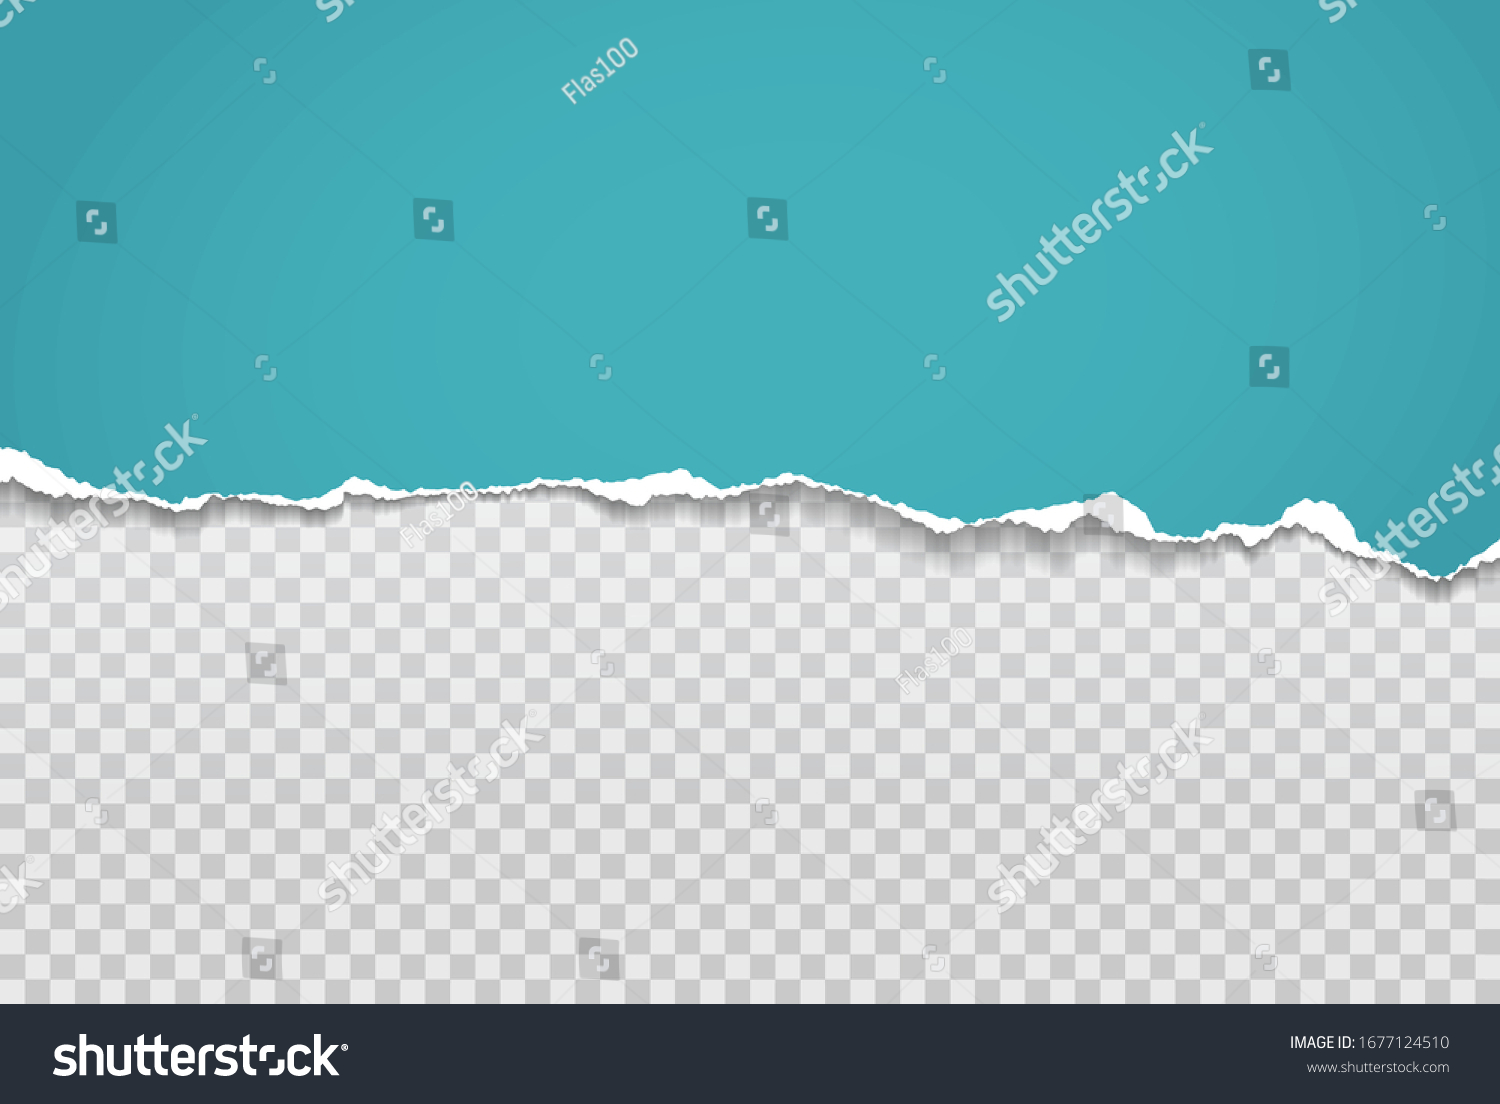 Torn, ripped piece of horizontal blue paper with soft shadow is on squared grey background for text. Vector illustration #1677124510